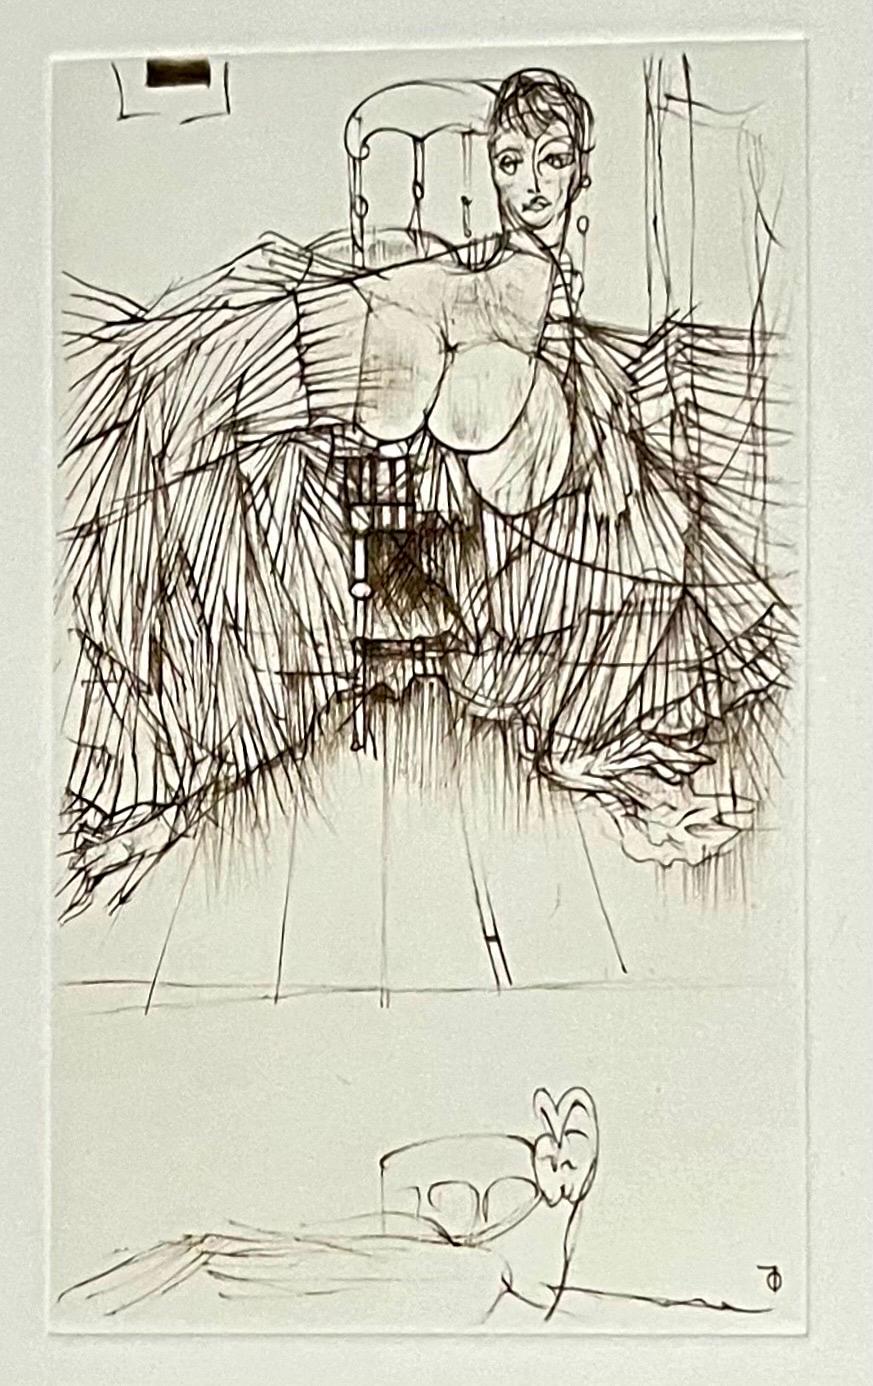 After Hans Bellmer (German, 1902-1975) 
Surrealist engraving, etching
after drawings from a 1942 notebook, 
engraved in 1974-75 by Cecile Reims
Printed by L'Atelier de Chalcographie du Louvre, Paris, 
Having printed monogram lower left in plate,